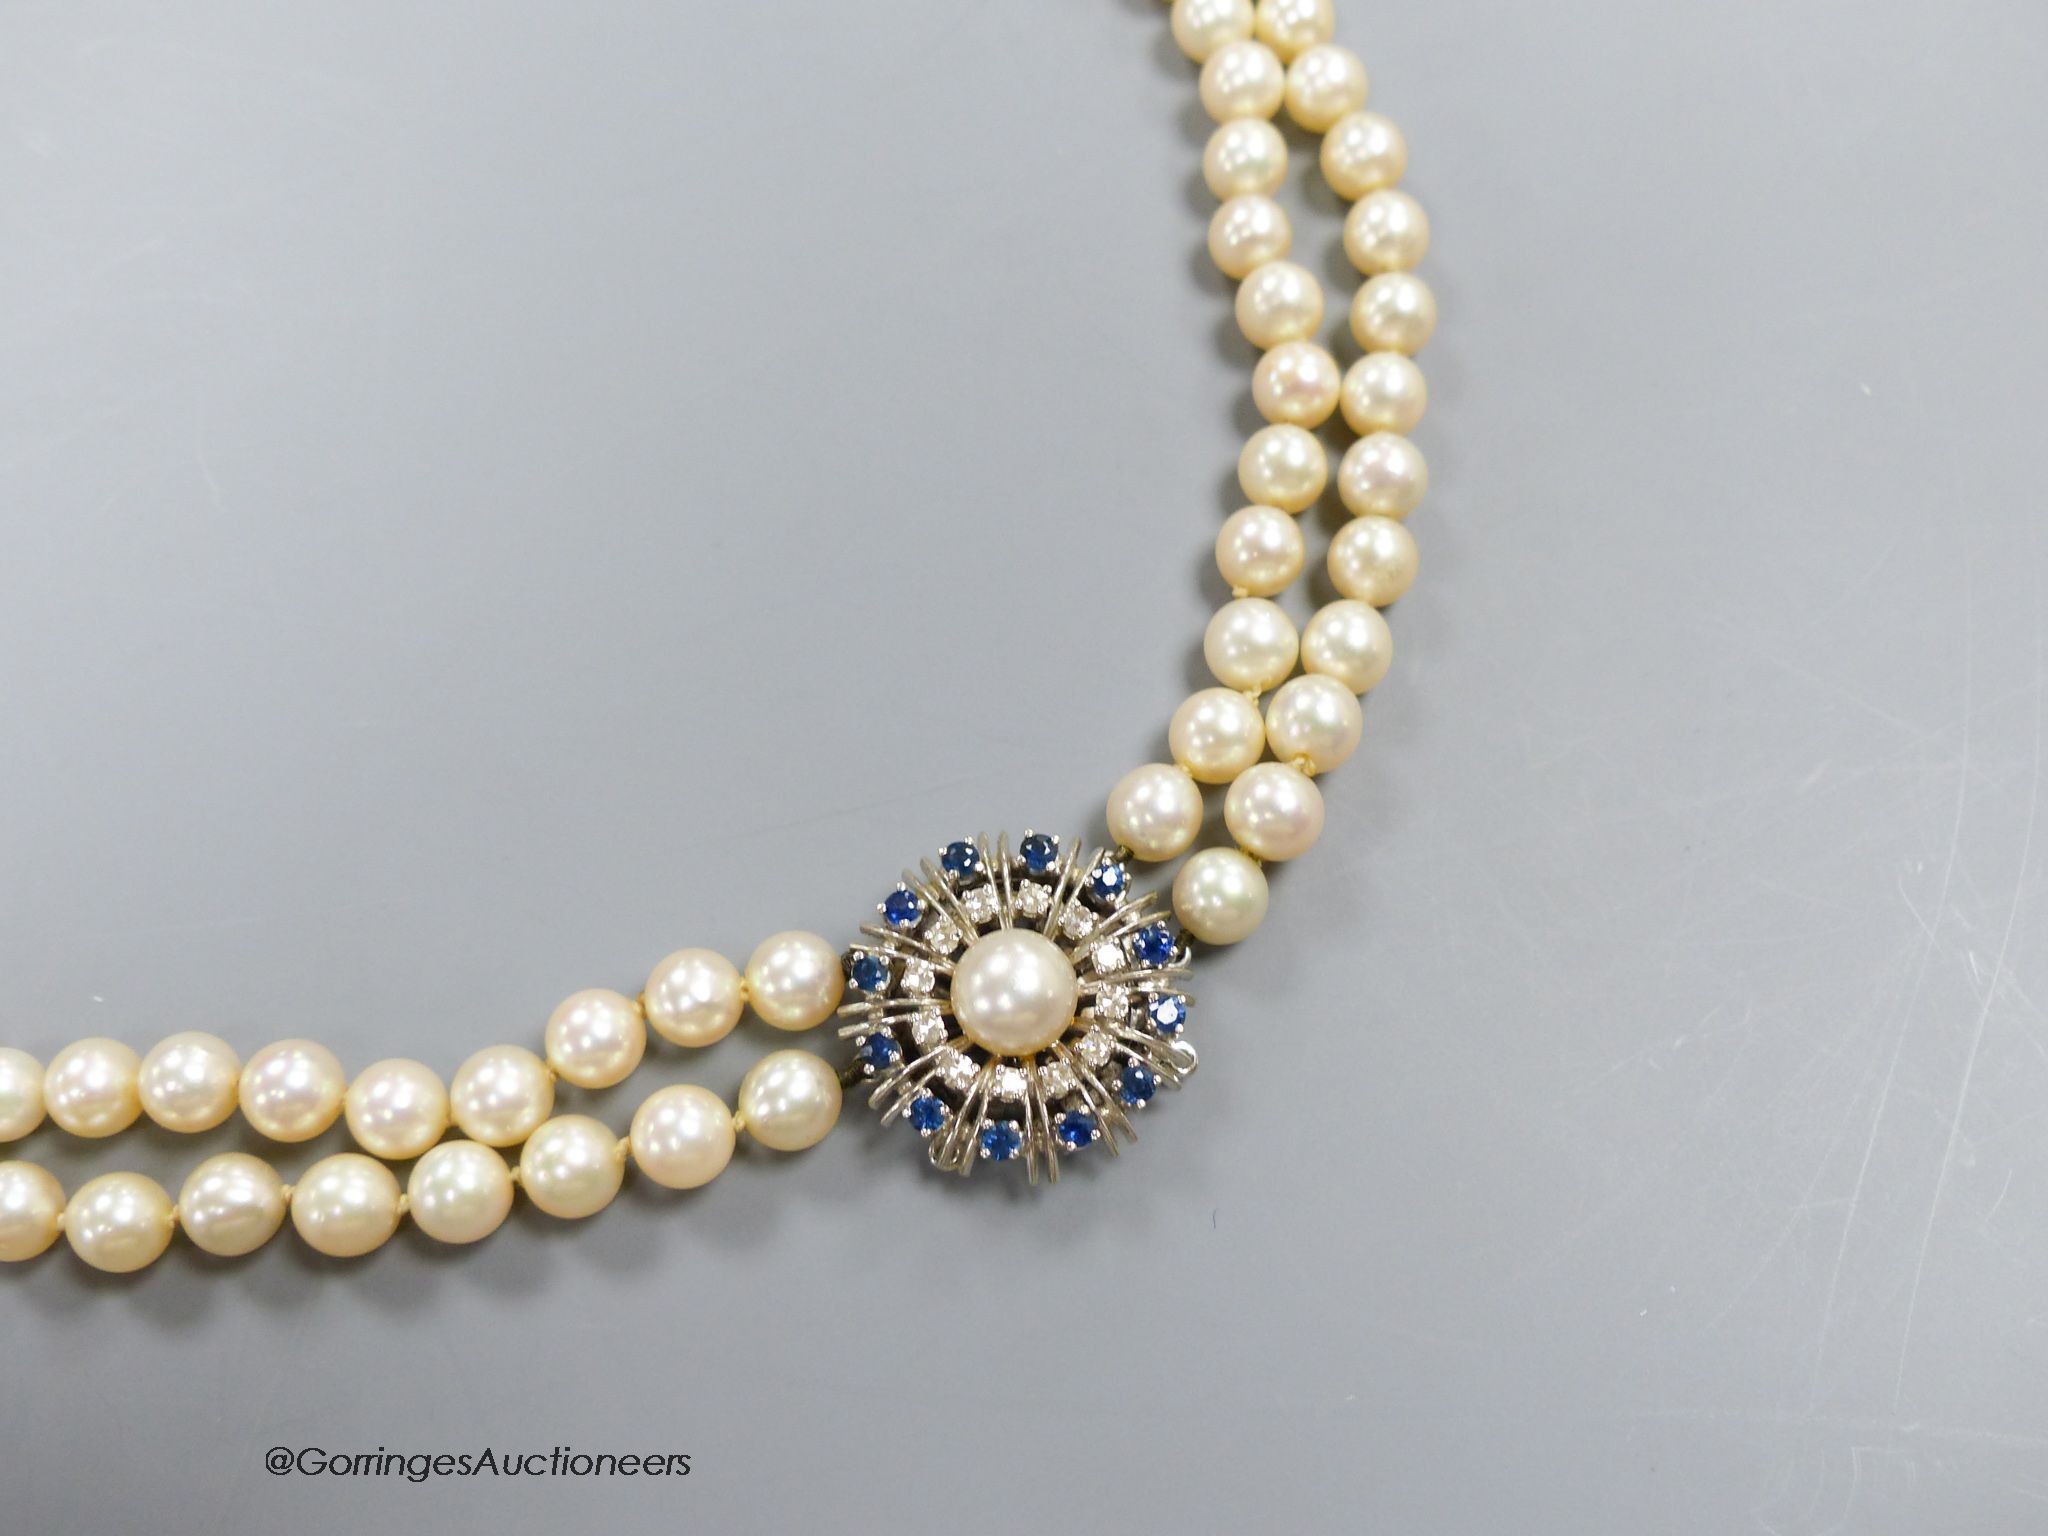 A two strand cultured pearl choker necklace with sapphire and diamond set 14k white gold clasp, length 40cm